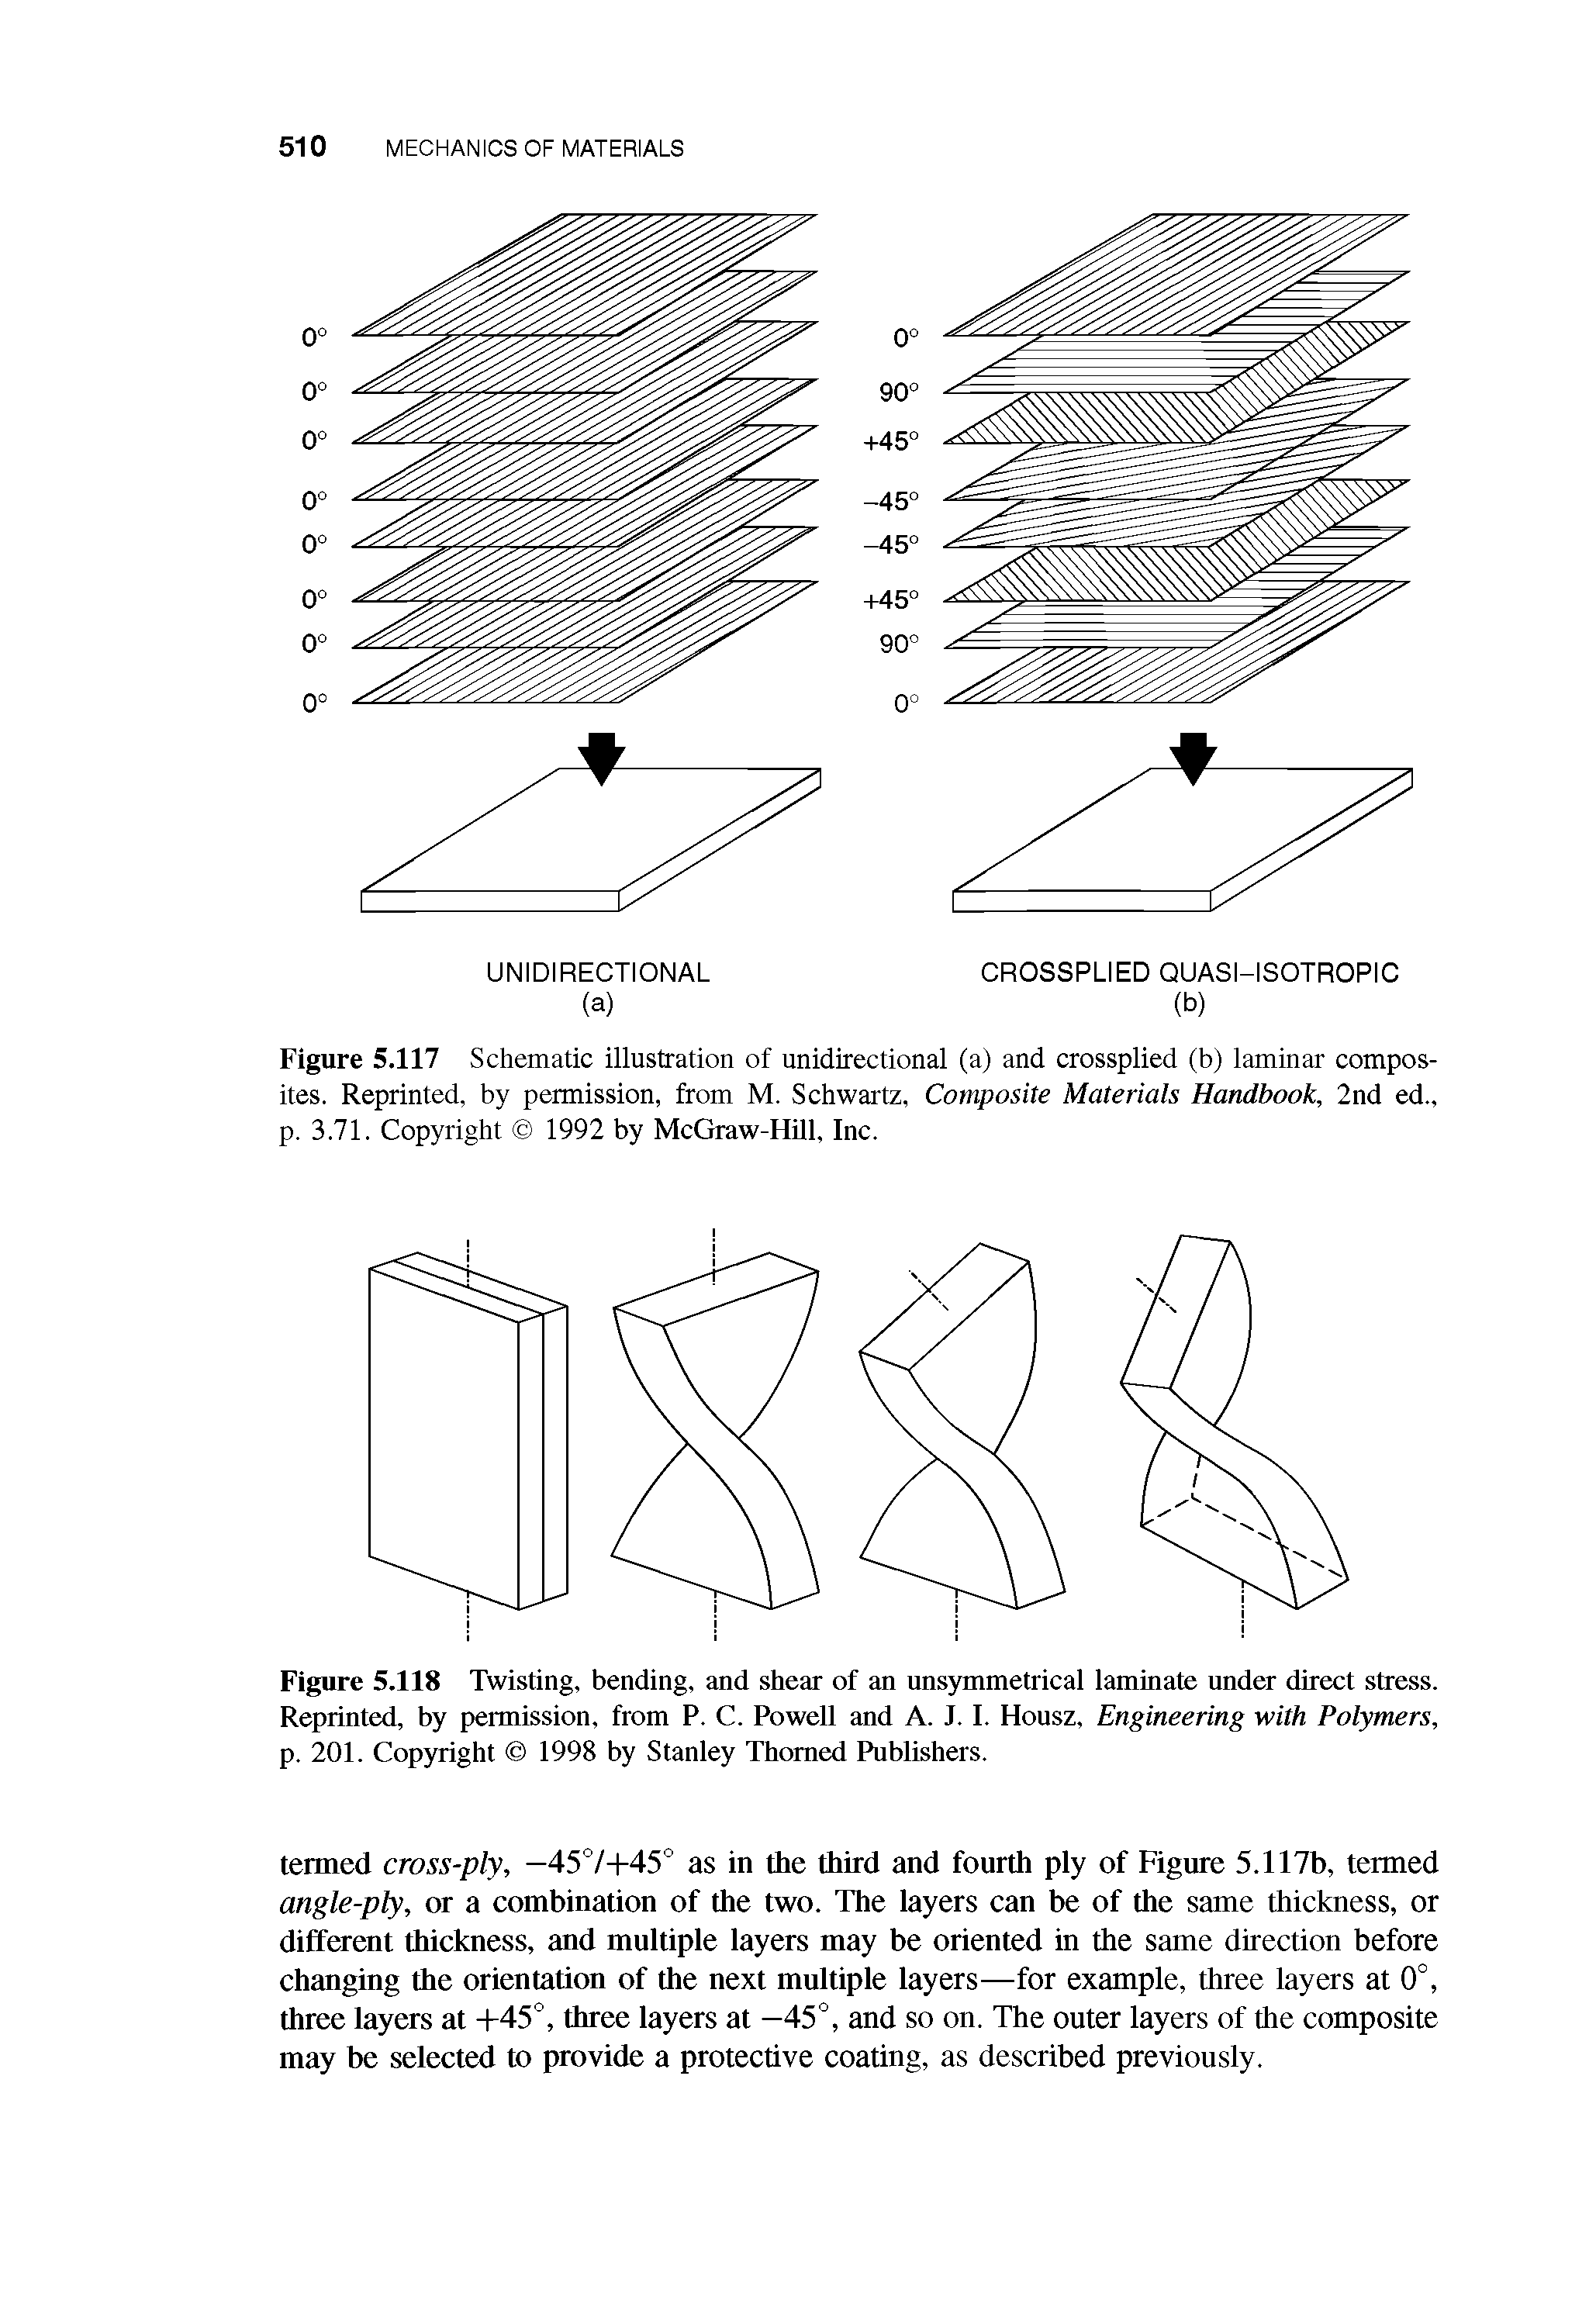 Figure 5.117 Schematic illustration of unidirectional (a) and crossplied (b) laminar composites. Reprinted, by permission, from M. Schwartz, Composite Materials Handbook, 2nd ed., p. 3.71. Copyright 1992 by McGraw-HUl, Inc.